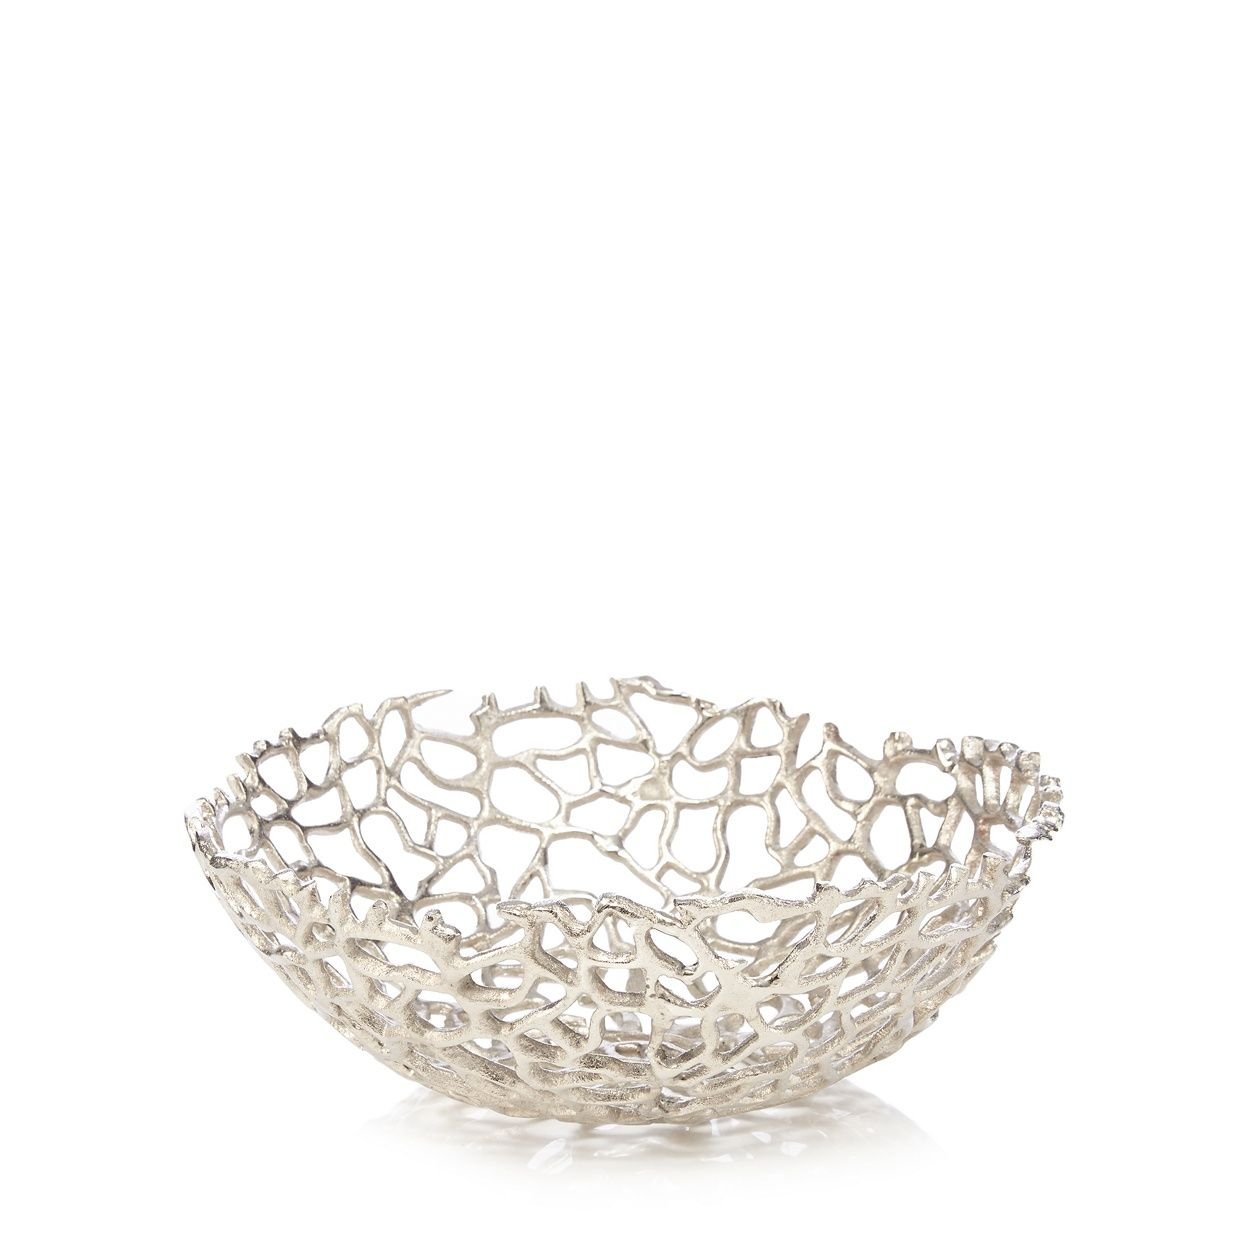 From Our Exclusive Rjrjohn Rocha Range This Elegant Bowl for sizing 1250 X 1250